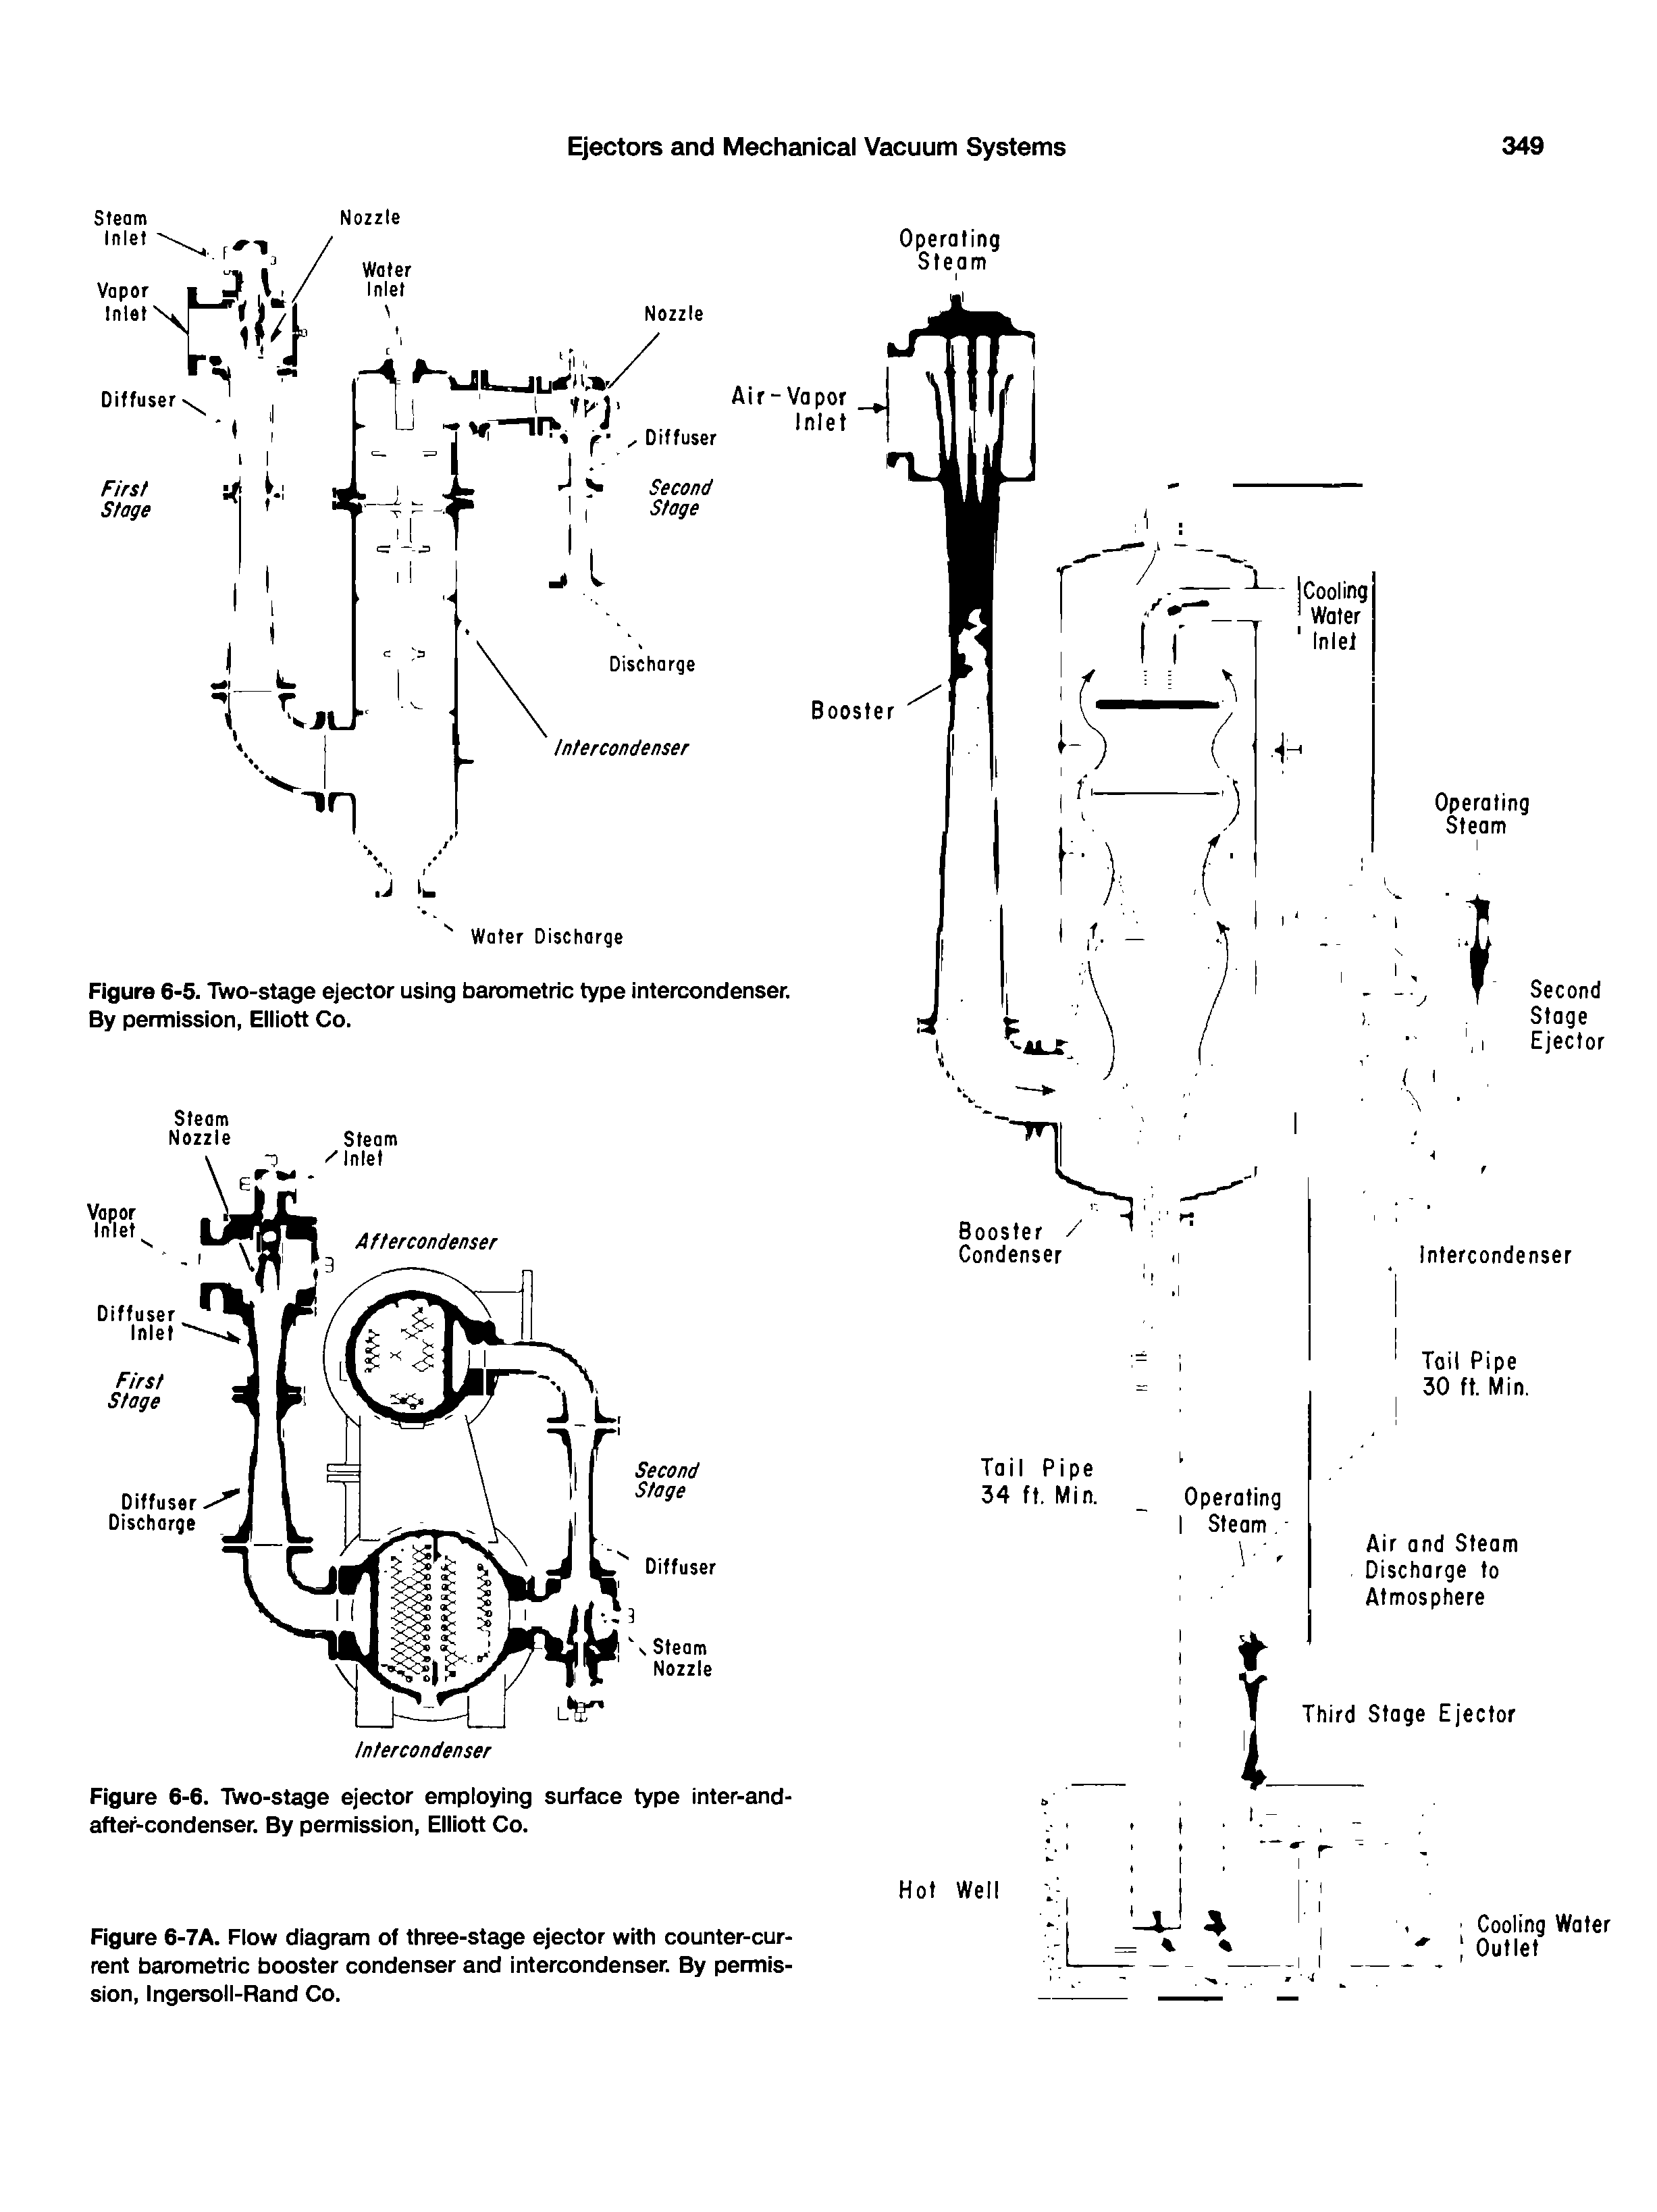 Figure 6-7A. Flow diagram of three-stage ejector wHh counter-current barometric booster condenser and intercondenser. By permission, ingersoll-Rand Co.